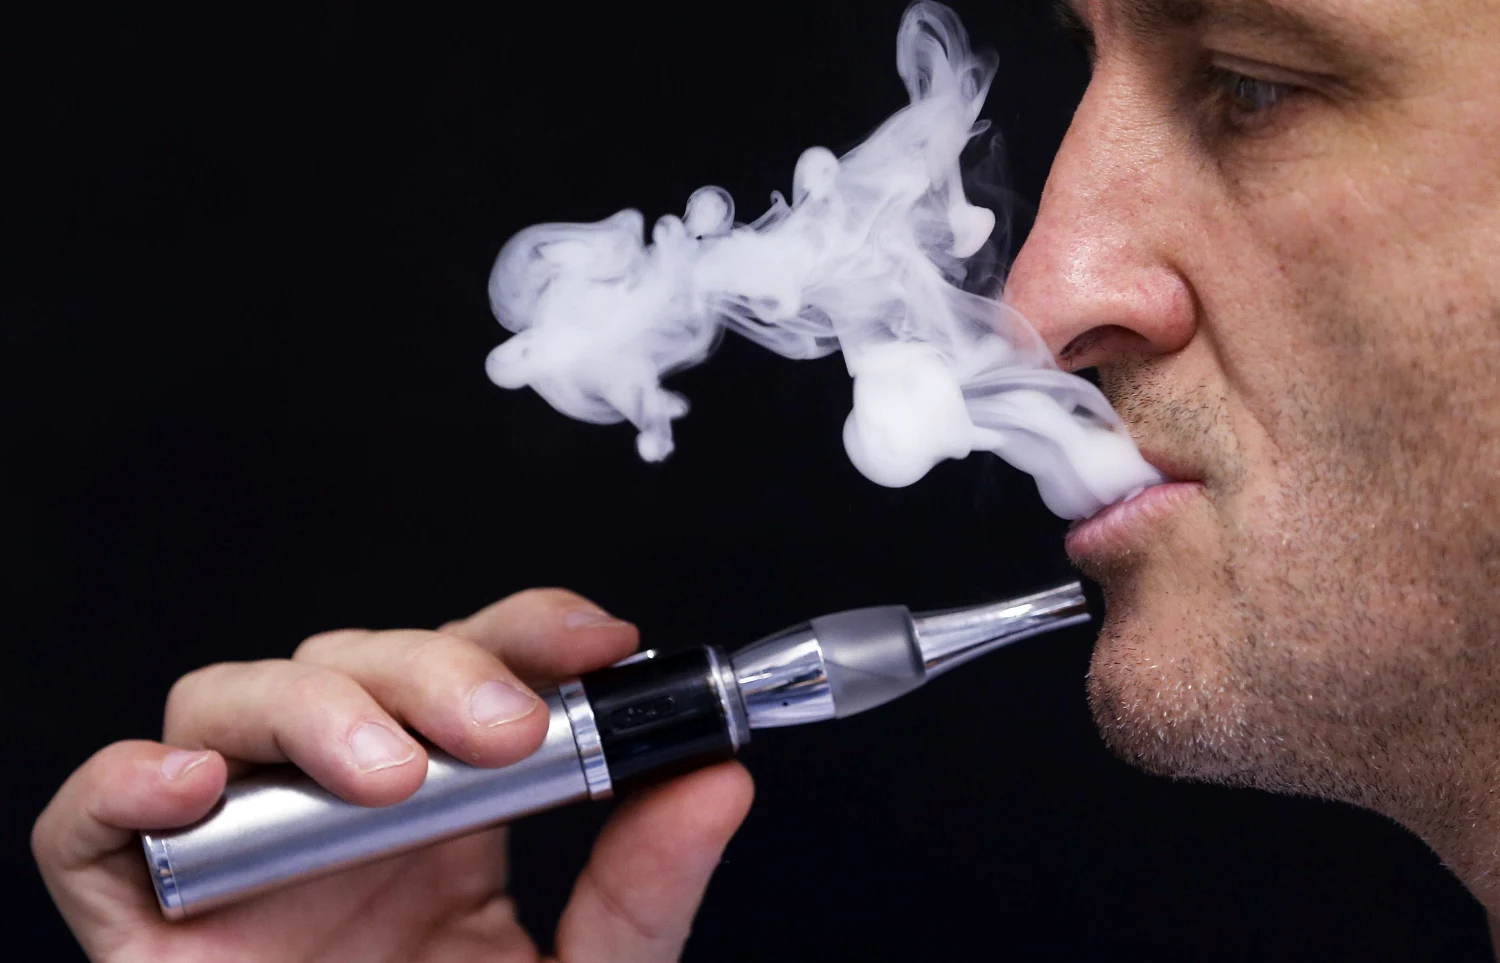 What Are The Crucial Tips That Act As A Guide In Suing The Electronic Cigarettes?